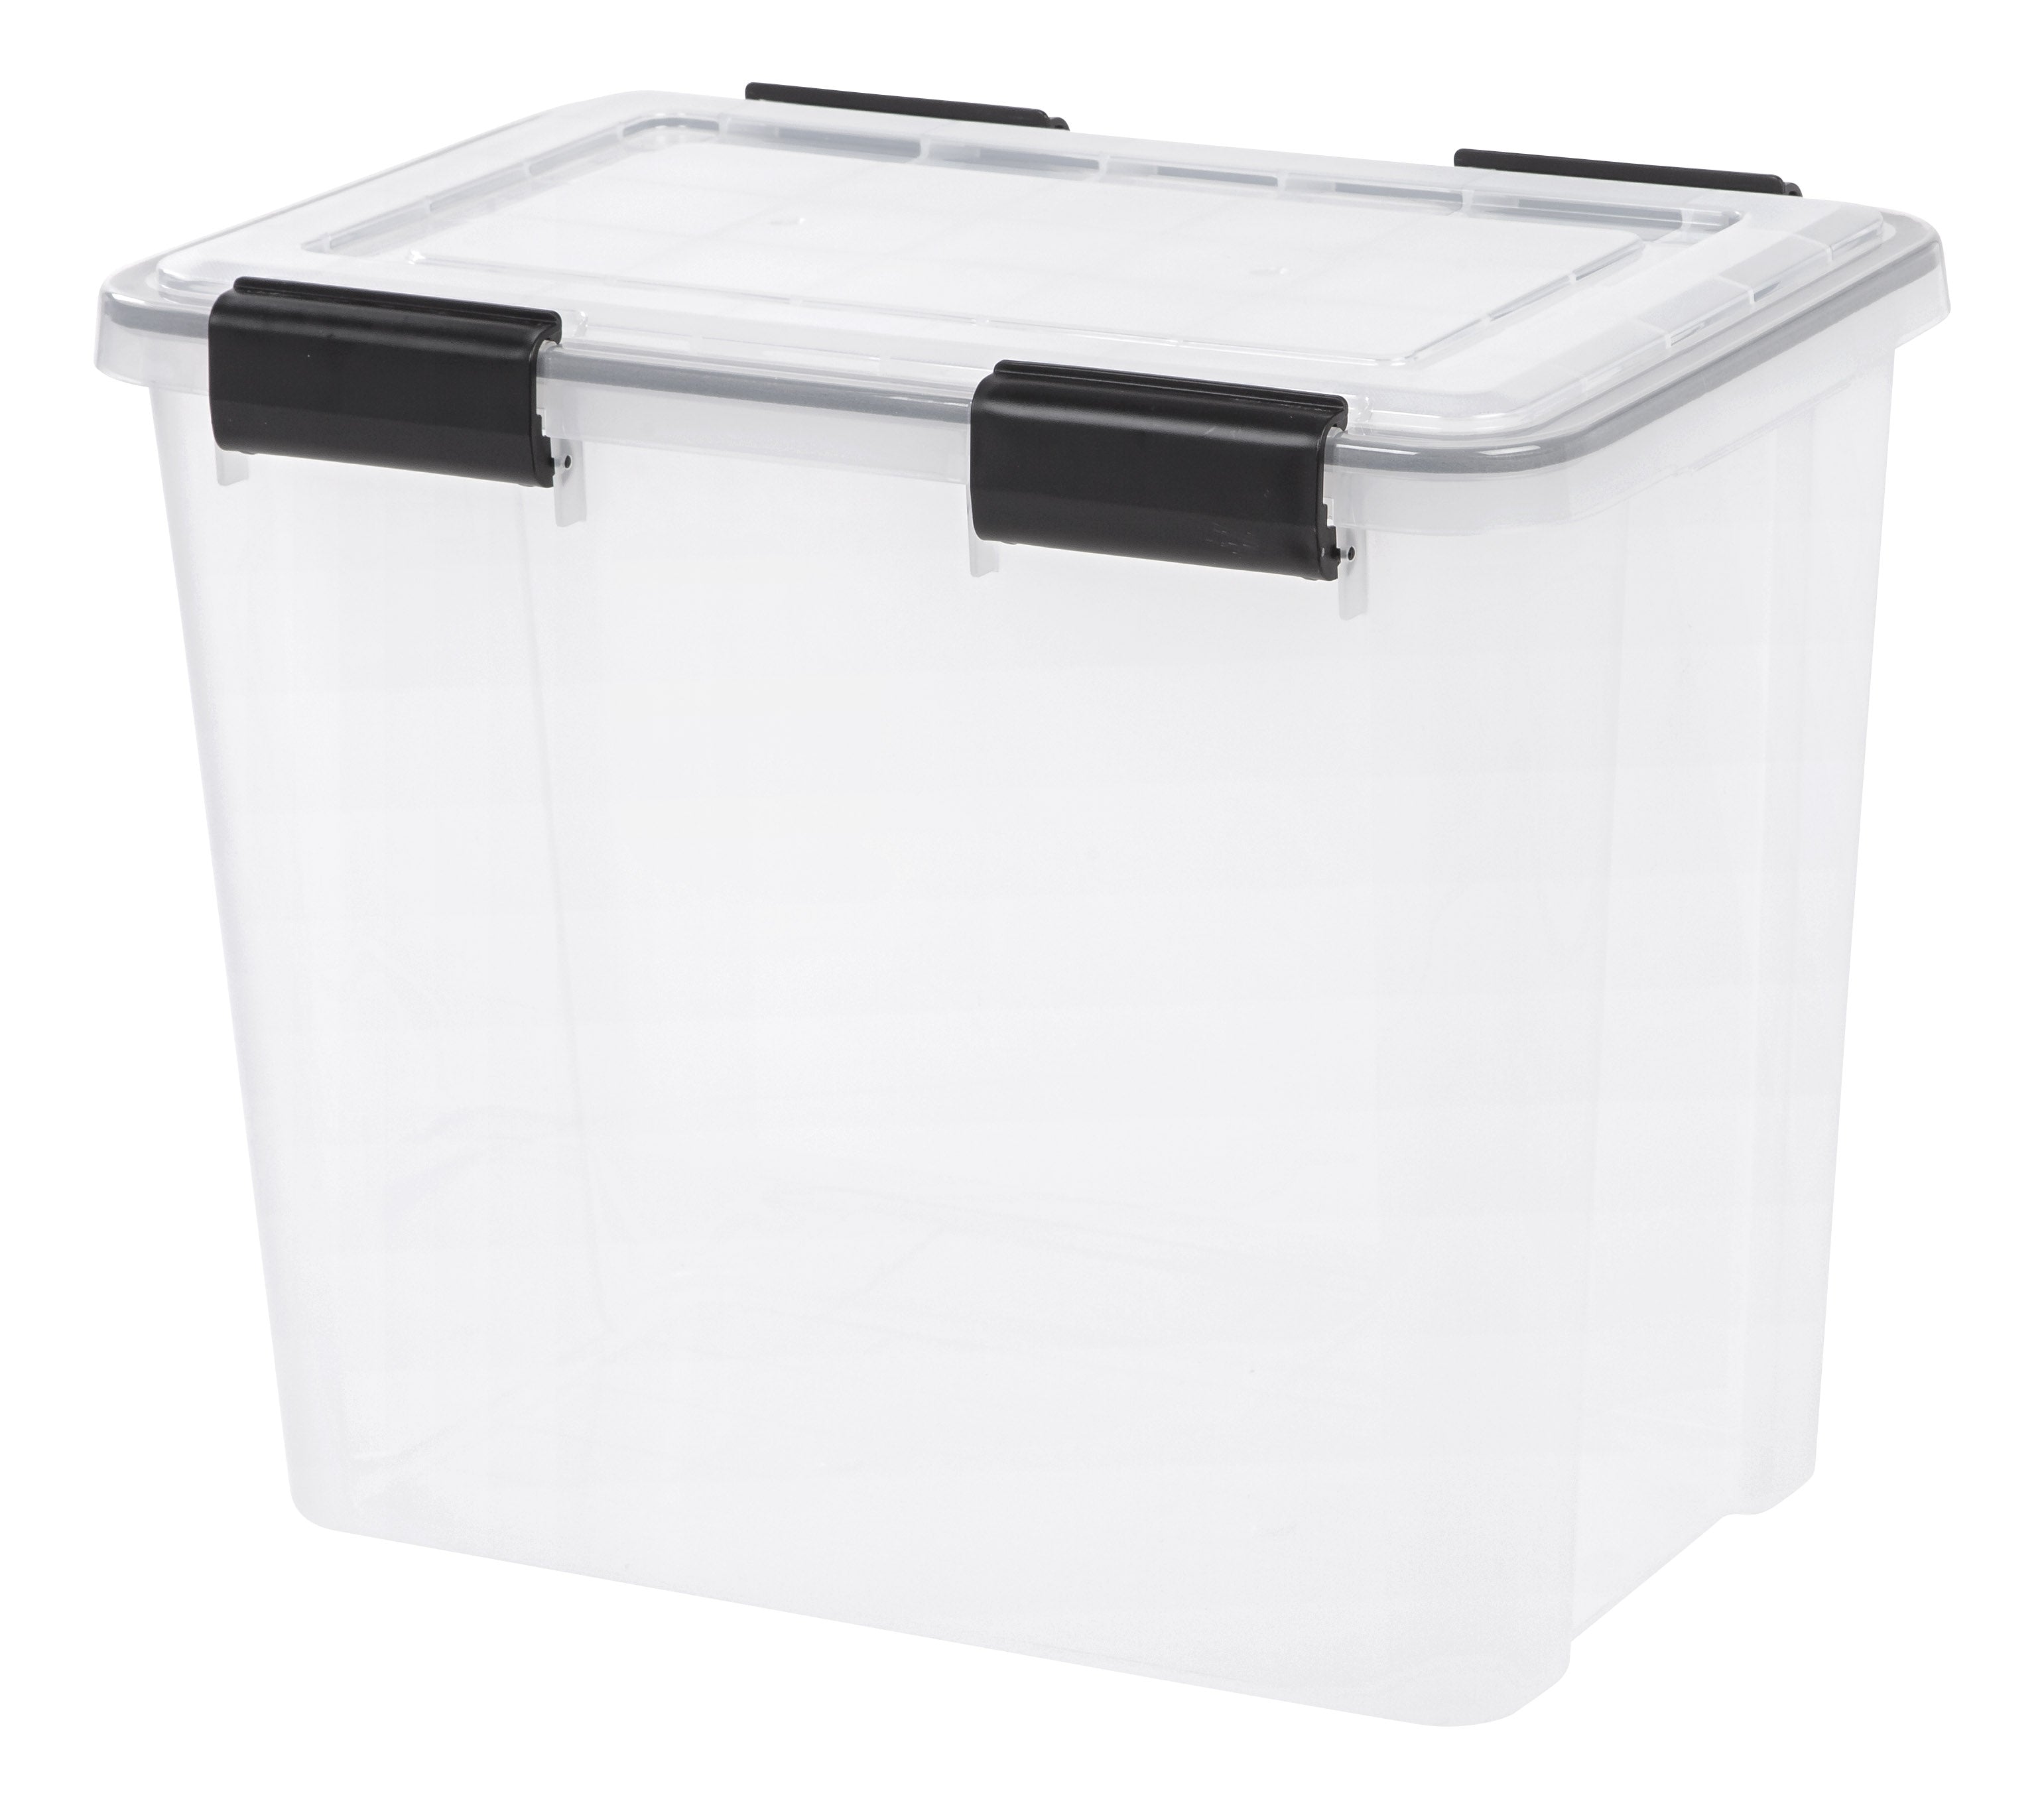 Iris 30.6 Quart Weatherpro Plastic Storage Bin Tote Organizing Container with Durable Lid and Seal and Secure Latching Buckles, 4 Pack